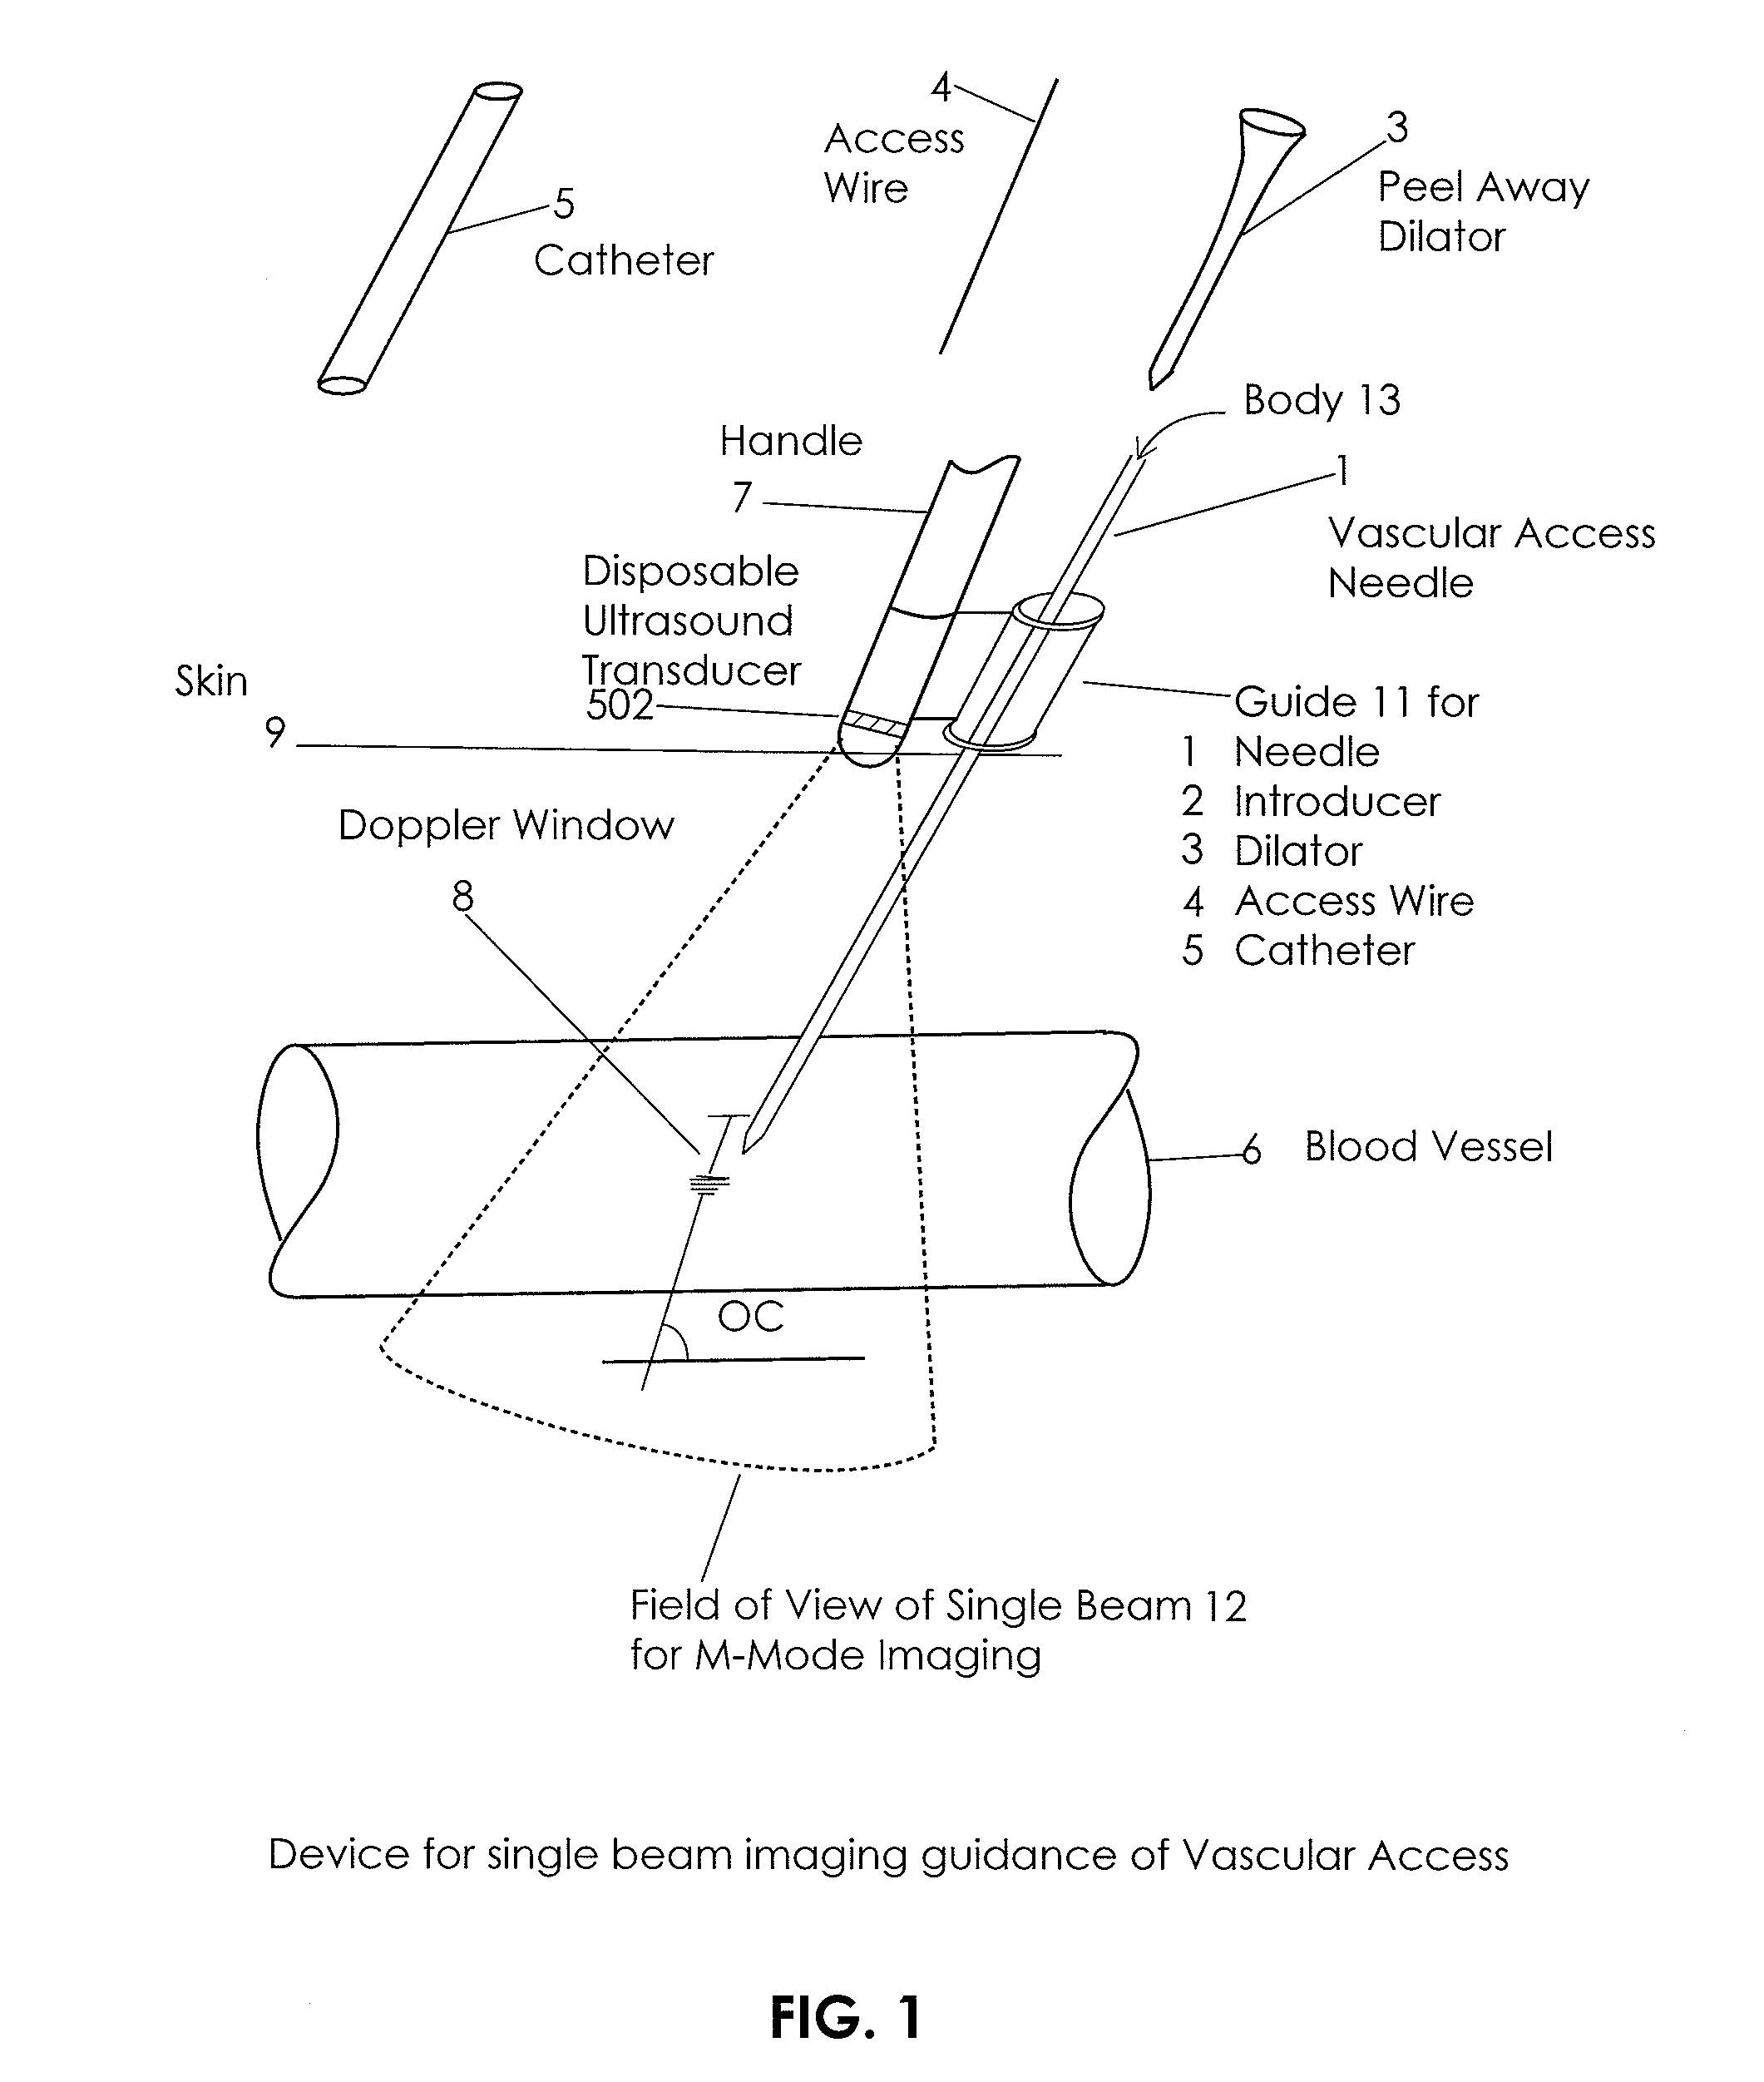 Apparatus and Method for Vascular Access